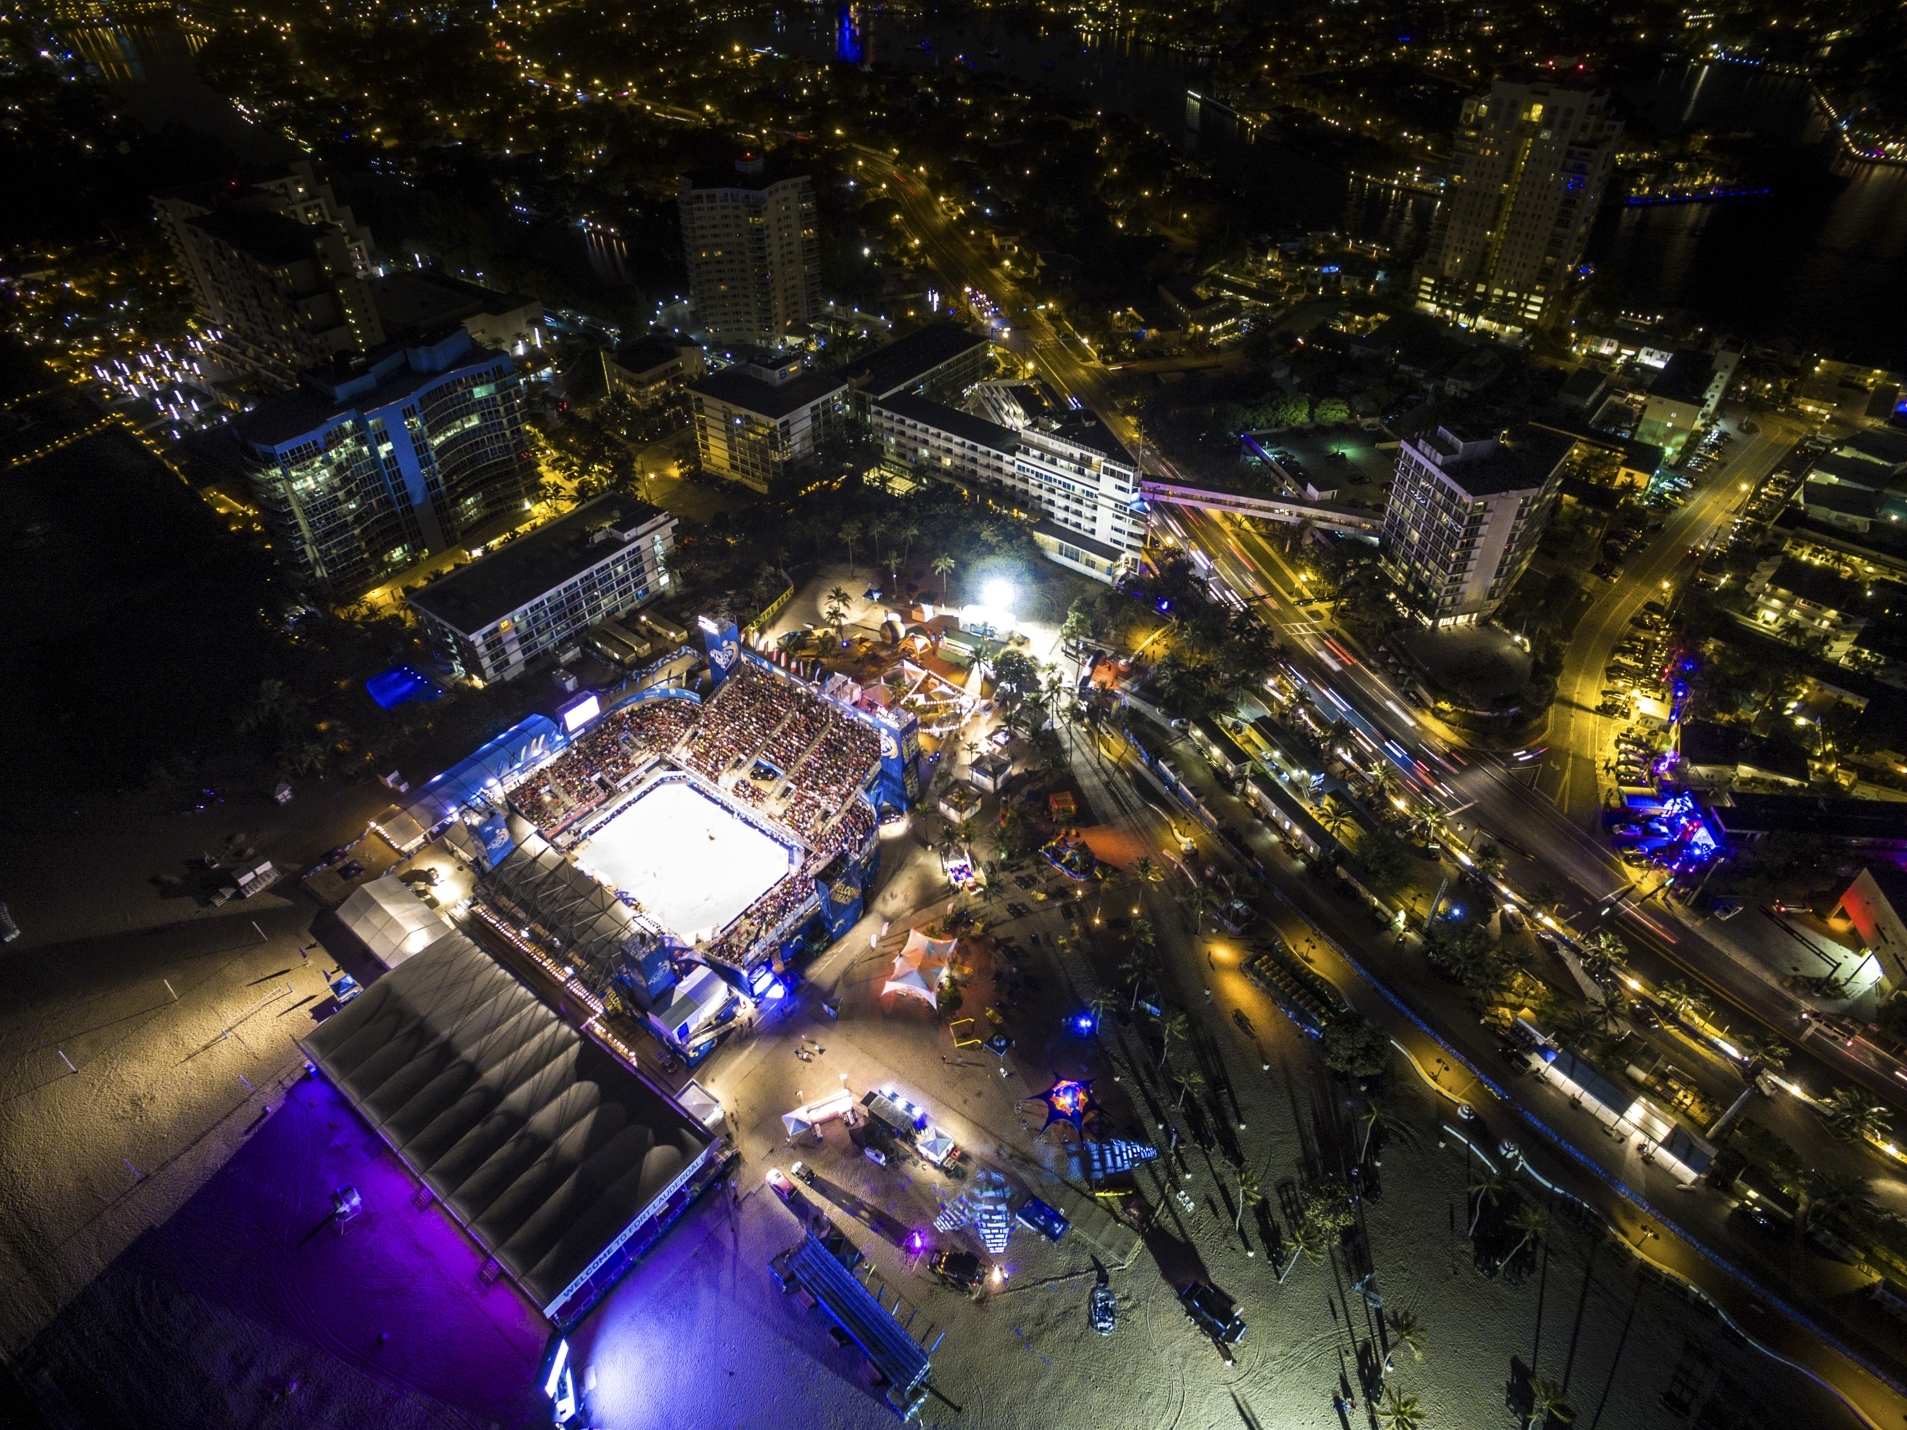 The packed Center Court under the lights at night at the Fort Lauderdale Major.